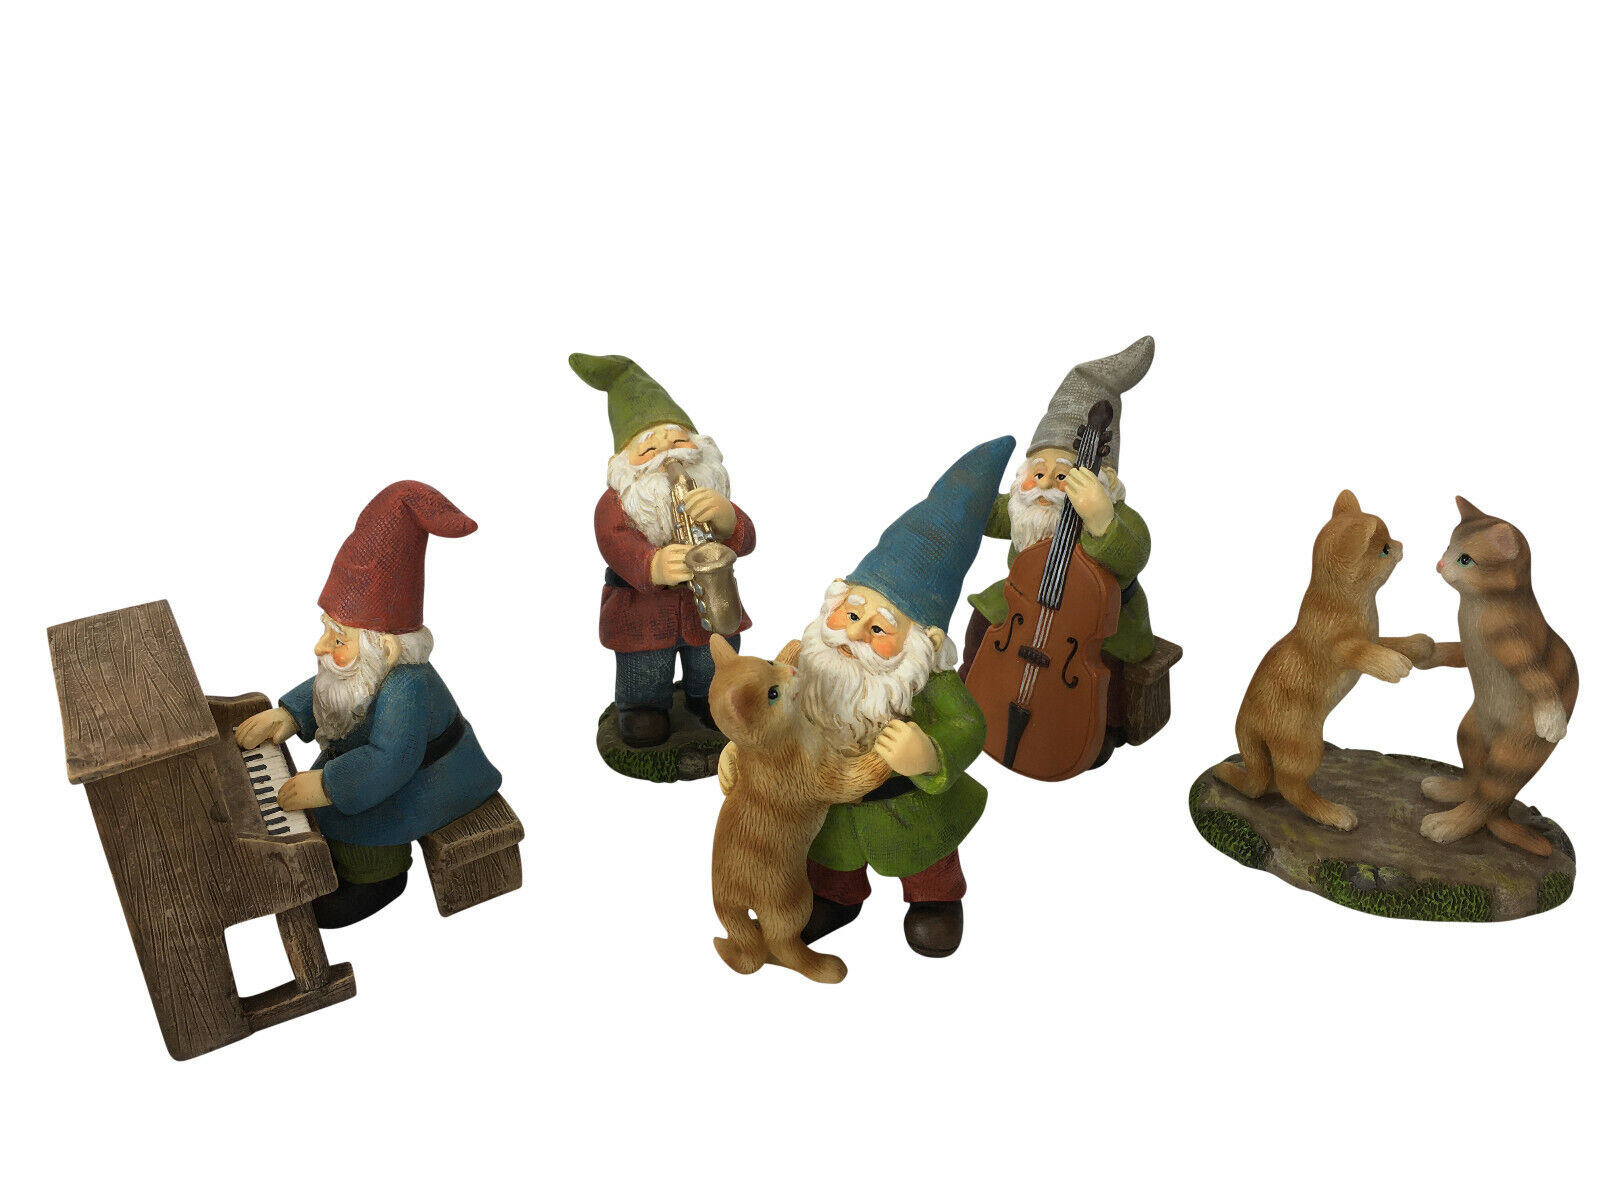 Happy Miniature Gnomes and Cats Dancing Celebration - A Fairy Garden Gnome Set